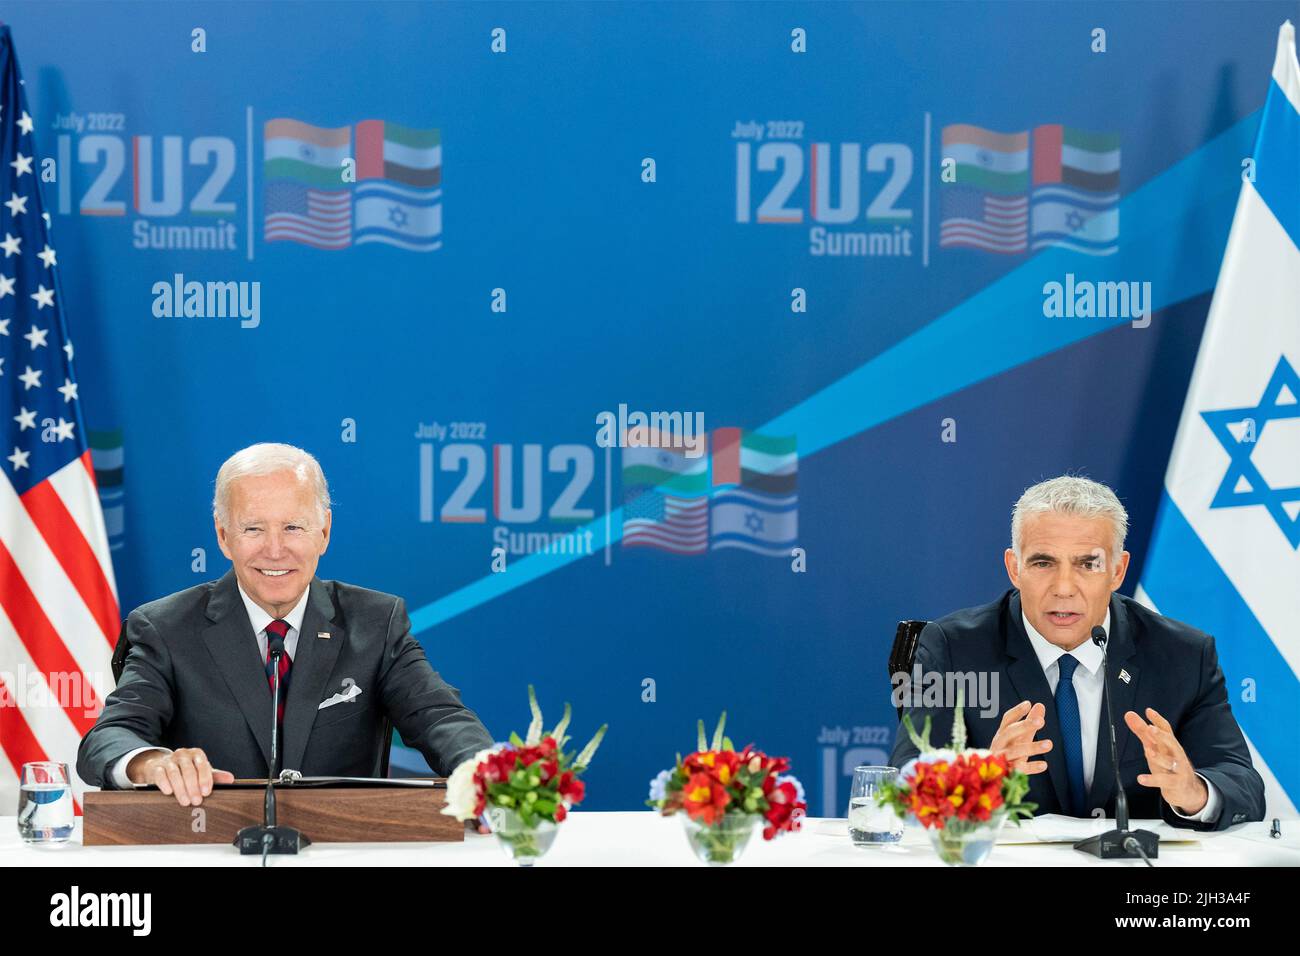 Jerusalem, Israel. 14th July, 2022. U.S President Joe Biden, and Israeli Prime Minister Yair Lapid, right, during a signing ceremony for the US-Israel Strategic Partnership agreement at the Waldorf Astoria, July 14, 2022 in Jerusalem, Israel. Credit: Adam Schultz/White House Photo/Alamy Live News Stock Photo